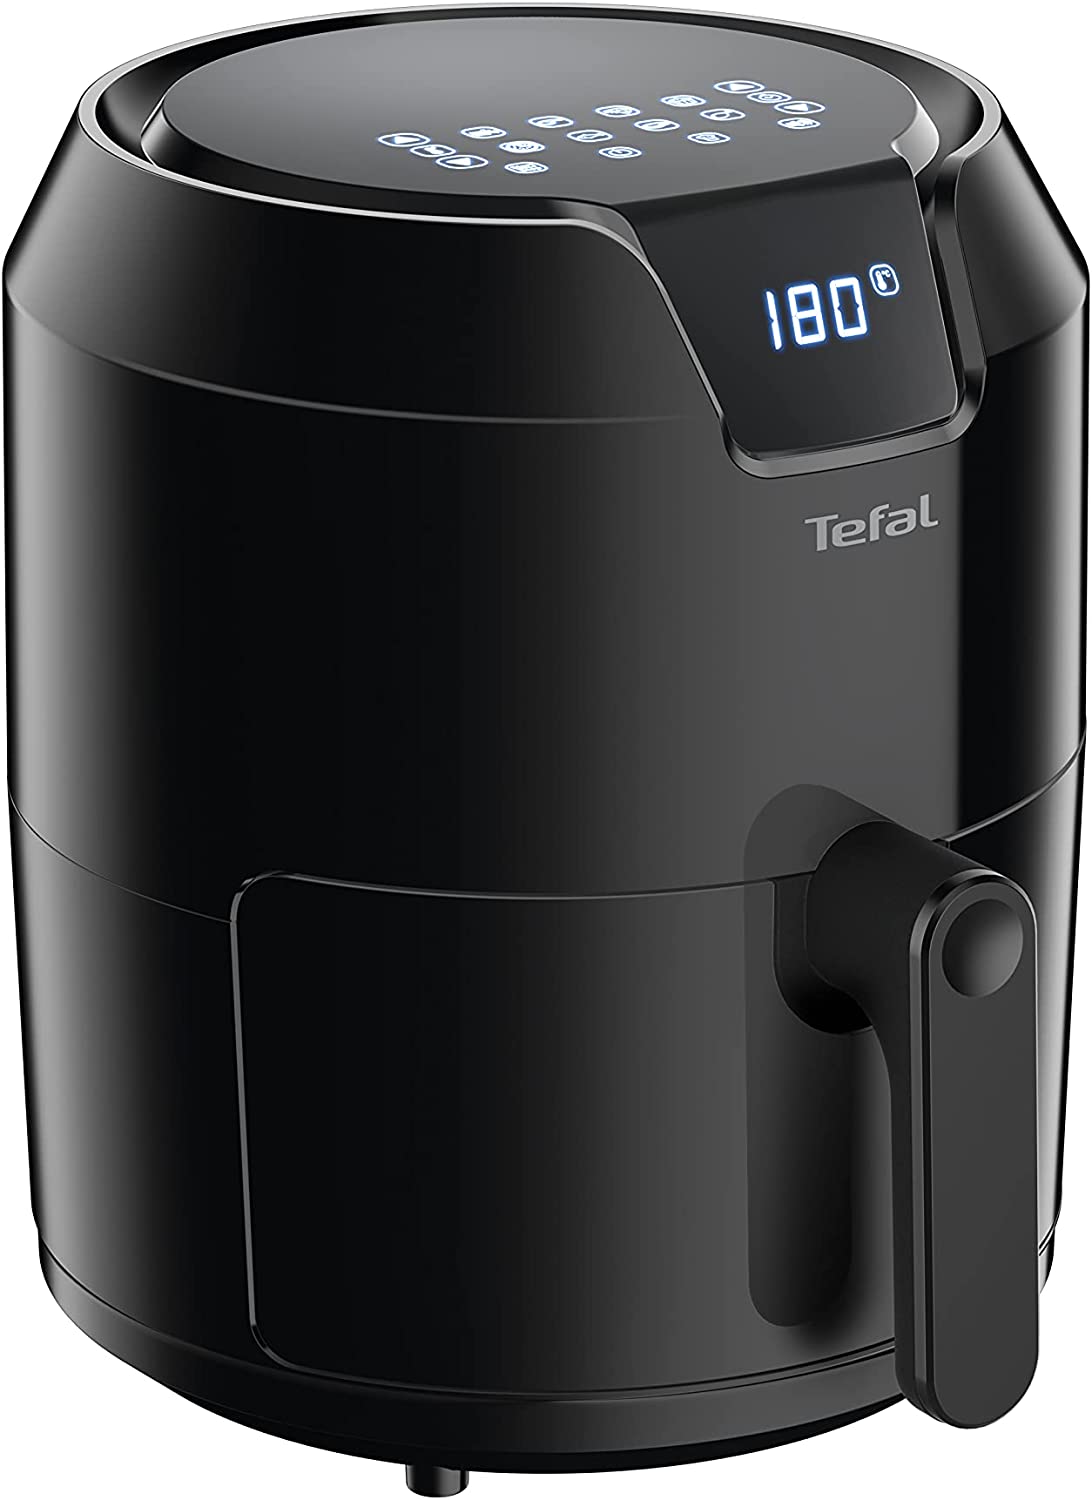 Tefal EY4018 Easy Fry Precision XL Hot Air Fryer, 1500 Watt, 4.2 Litre Capacity, Automatic Programmes, Digital Display, Timer, Without Grease/Oil, Black